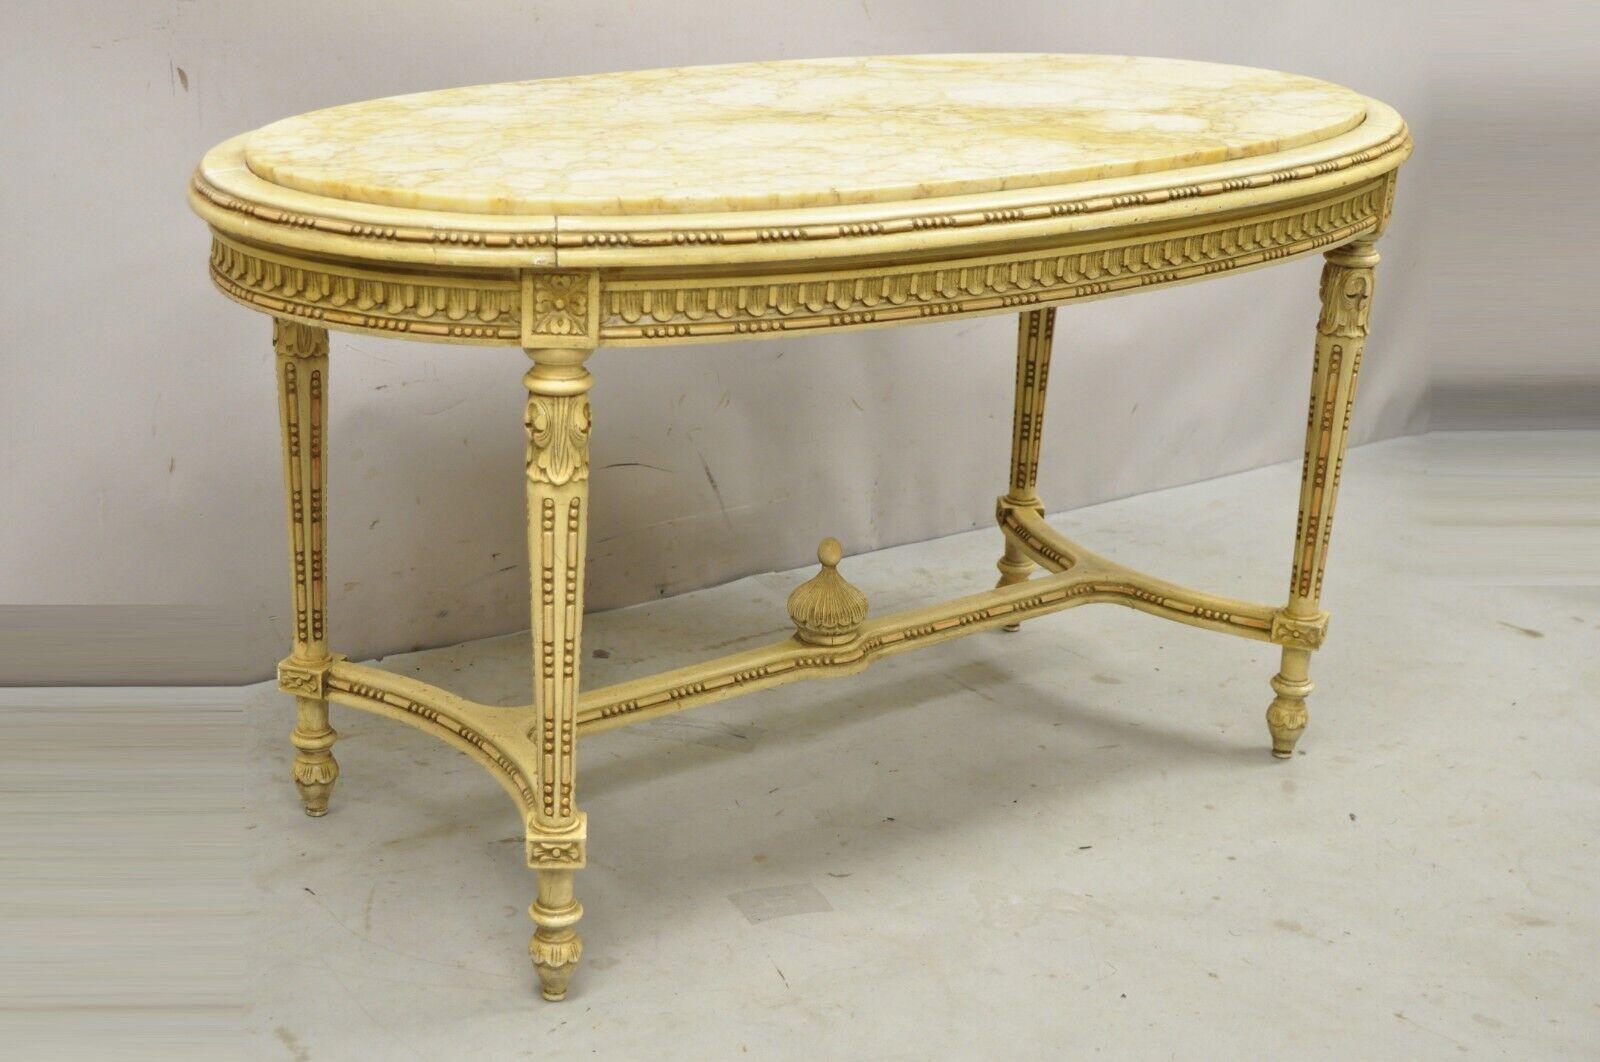 Vintage French Louis XV Style Oval Marble Top Yellow Beige Coffee Table. Item features an inset oval marble top, stretcher base, green and gold painted finish, solid wood frames, nicely carved details, very nice vintage item, great style and form.